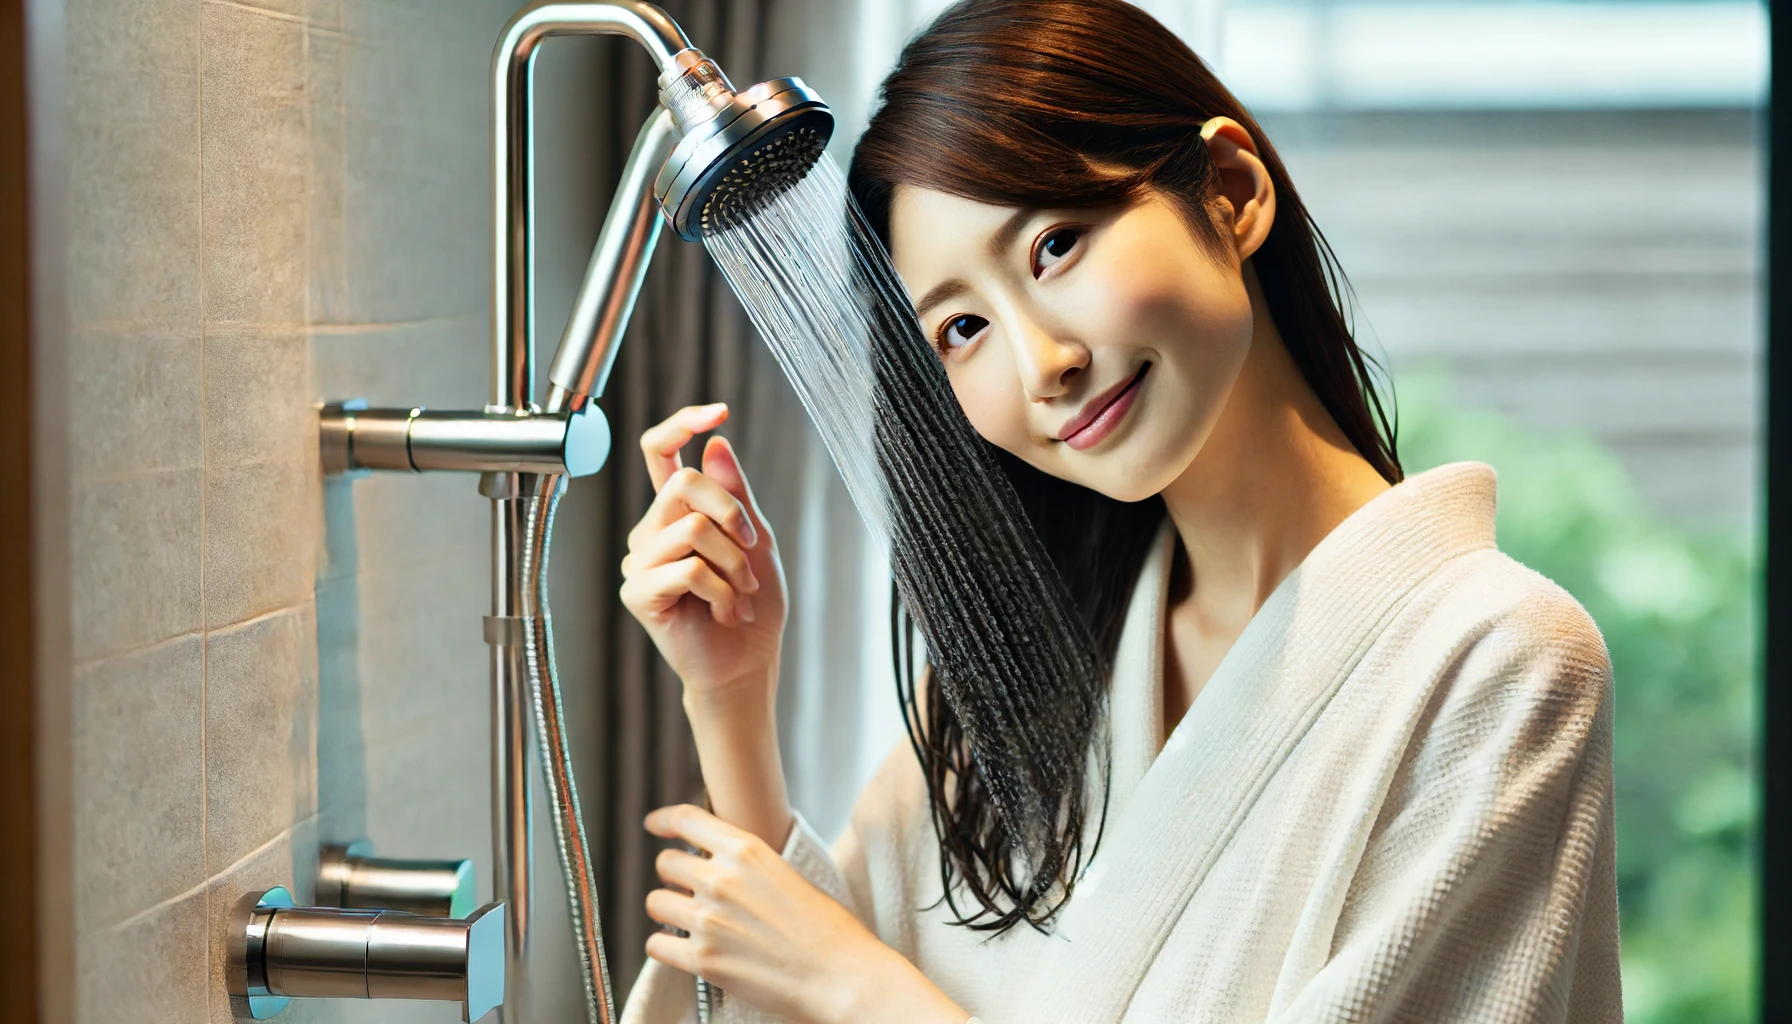 A Japanese woman washing her hair with a luxury handheld shower head in a modern, elegant bathroom. The shower head has a sleek design and the woman looks relaxed and enjoying the experience.